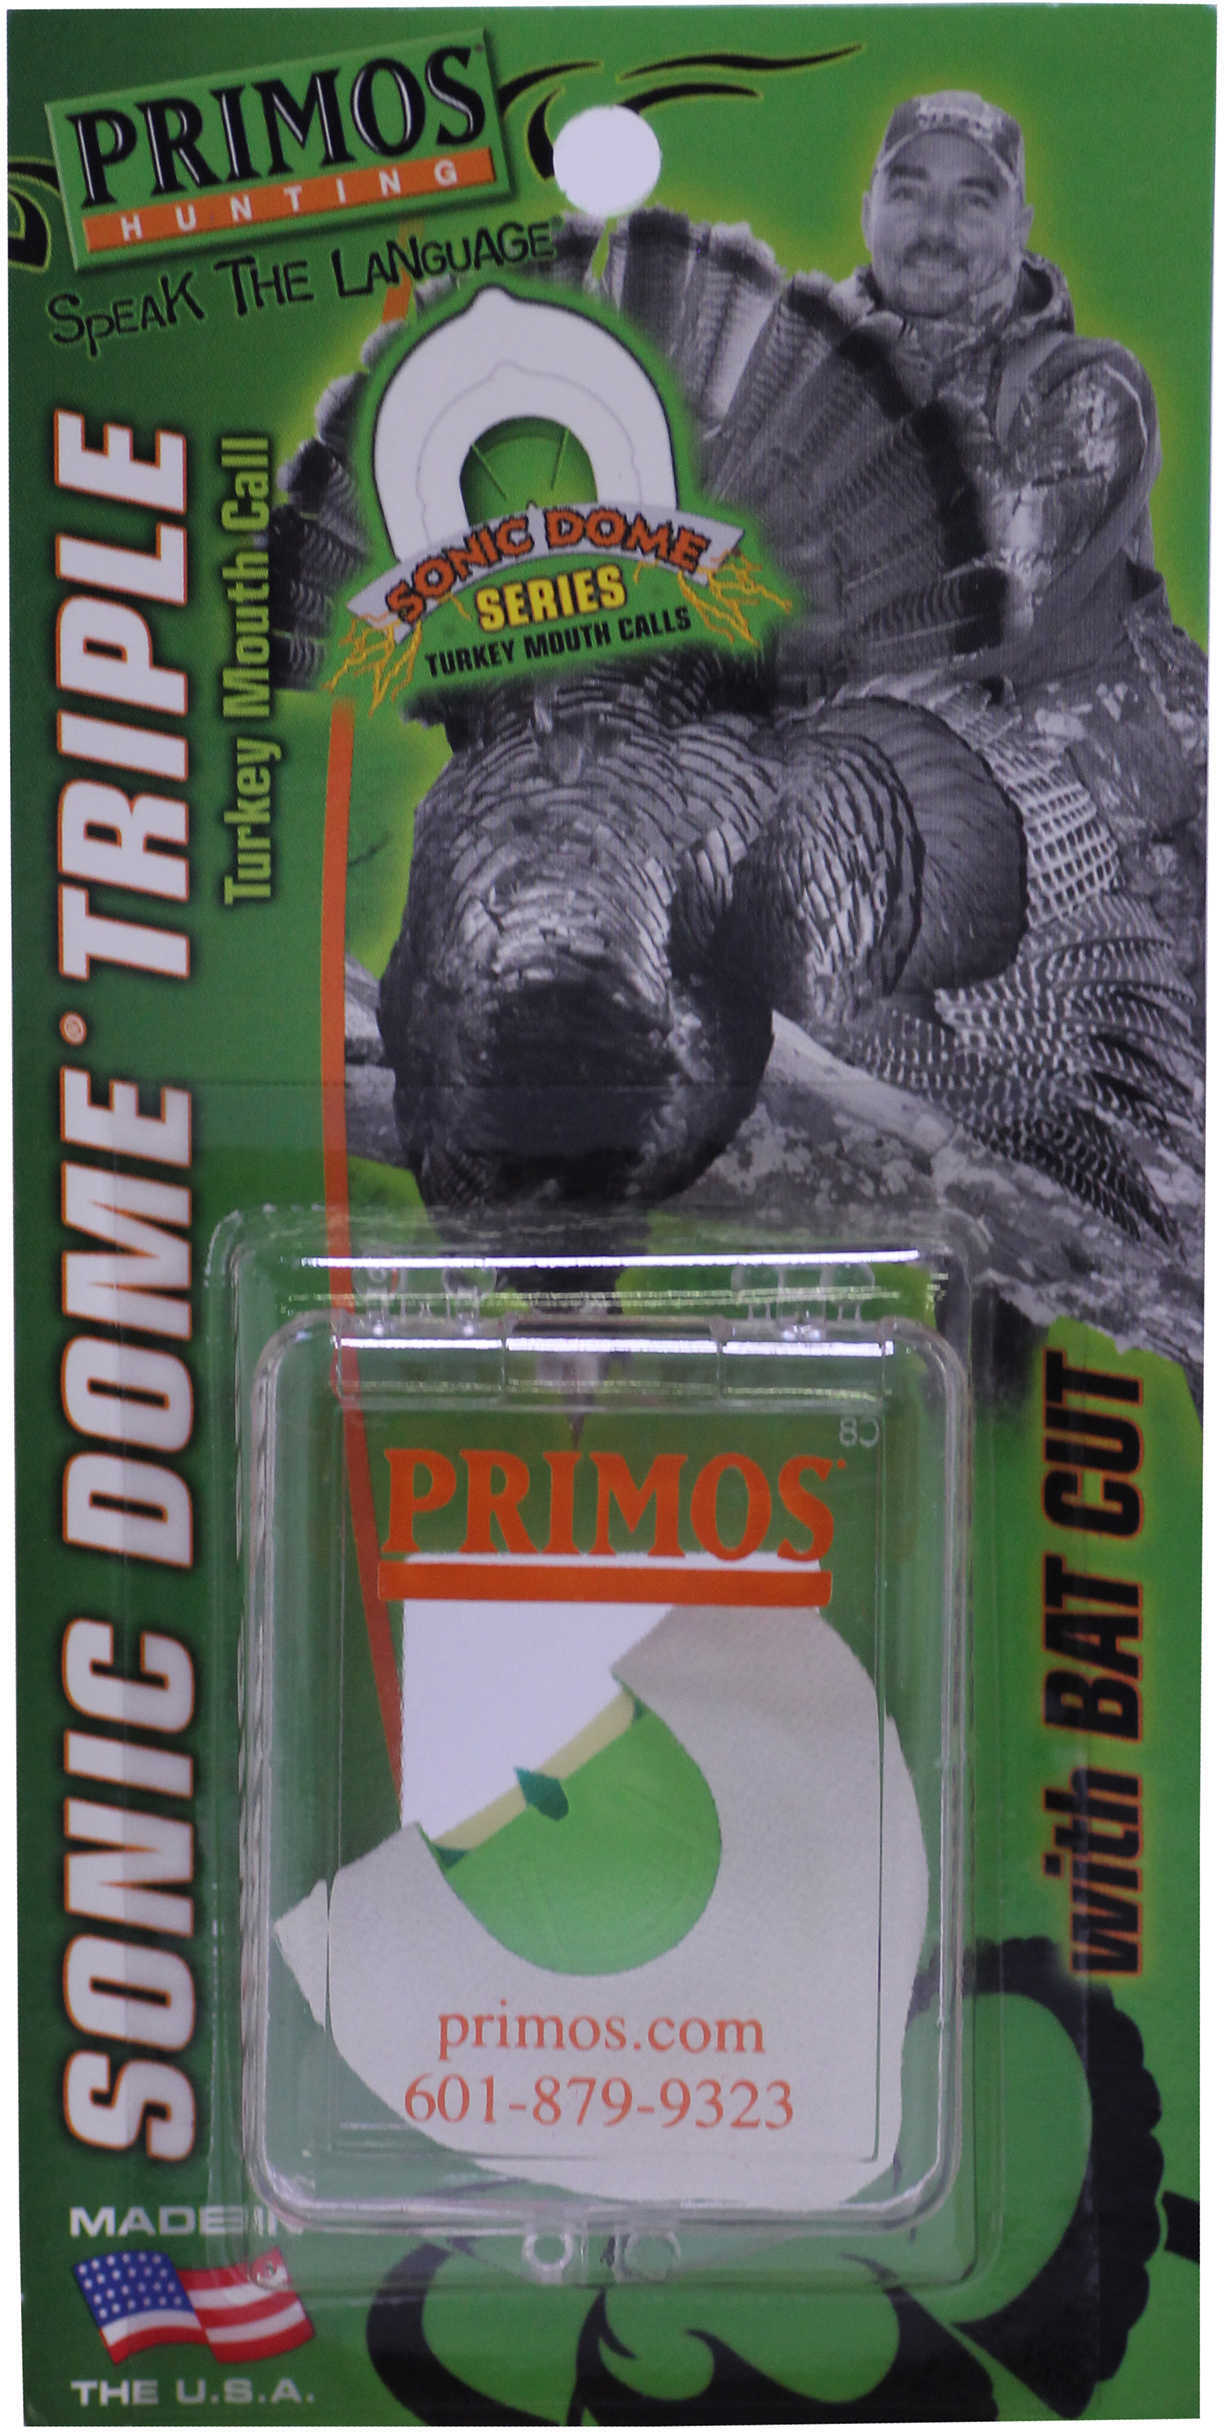 Primos Sonic Dome Series Diaphragm Turkey Call Triple With Bat Cut 1175 for sale online